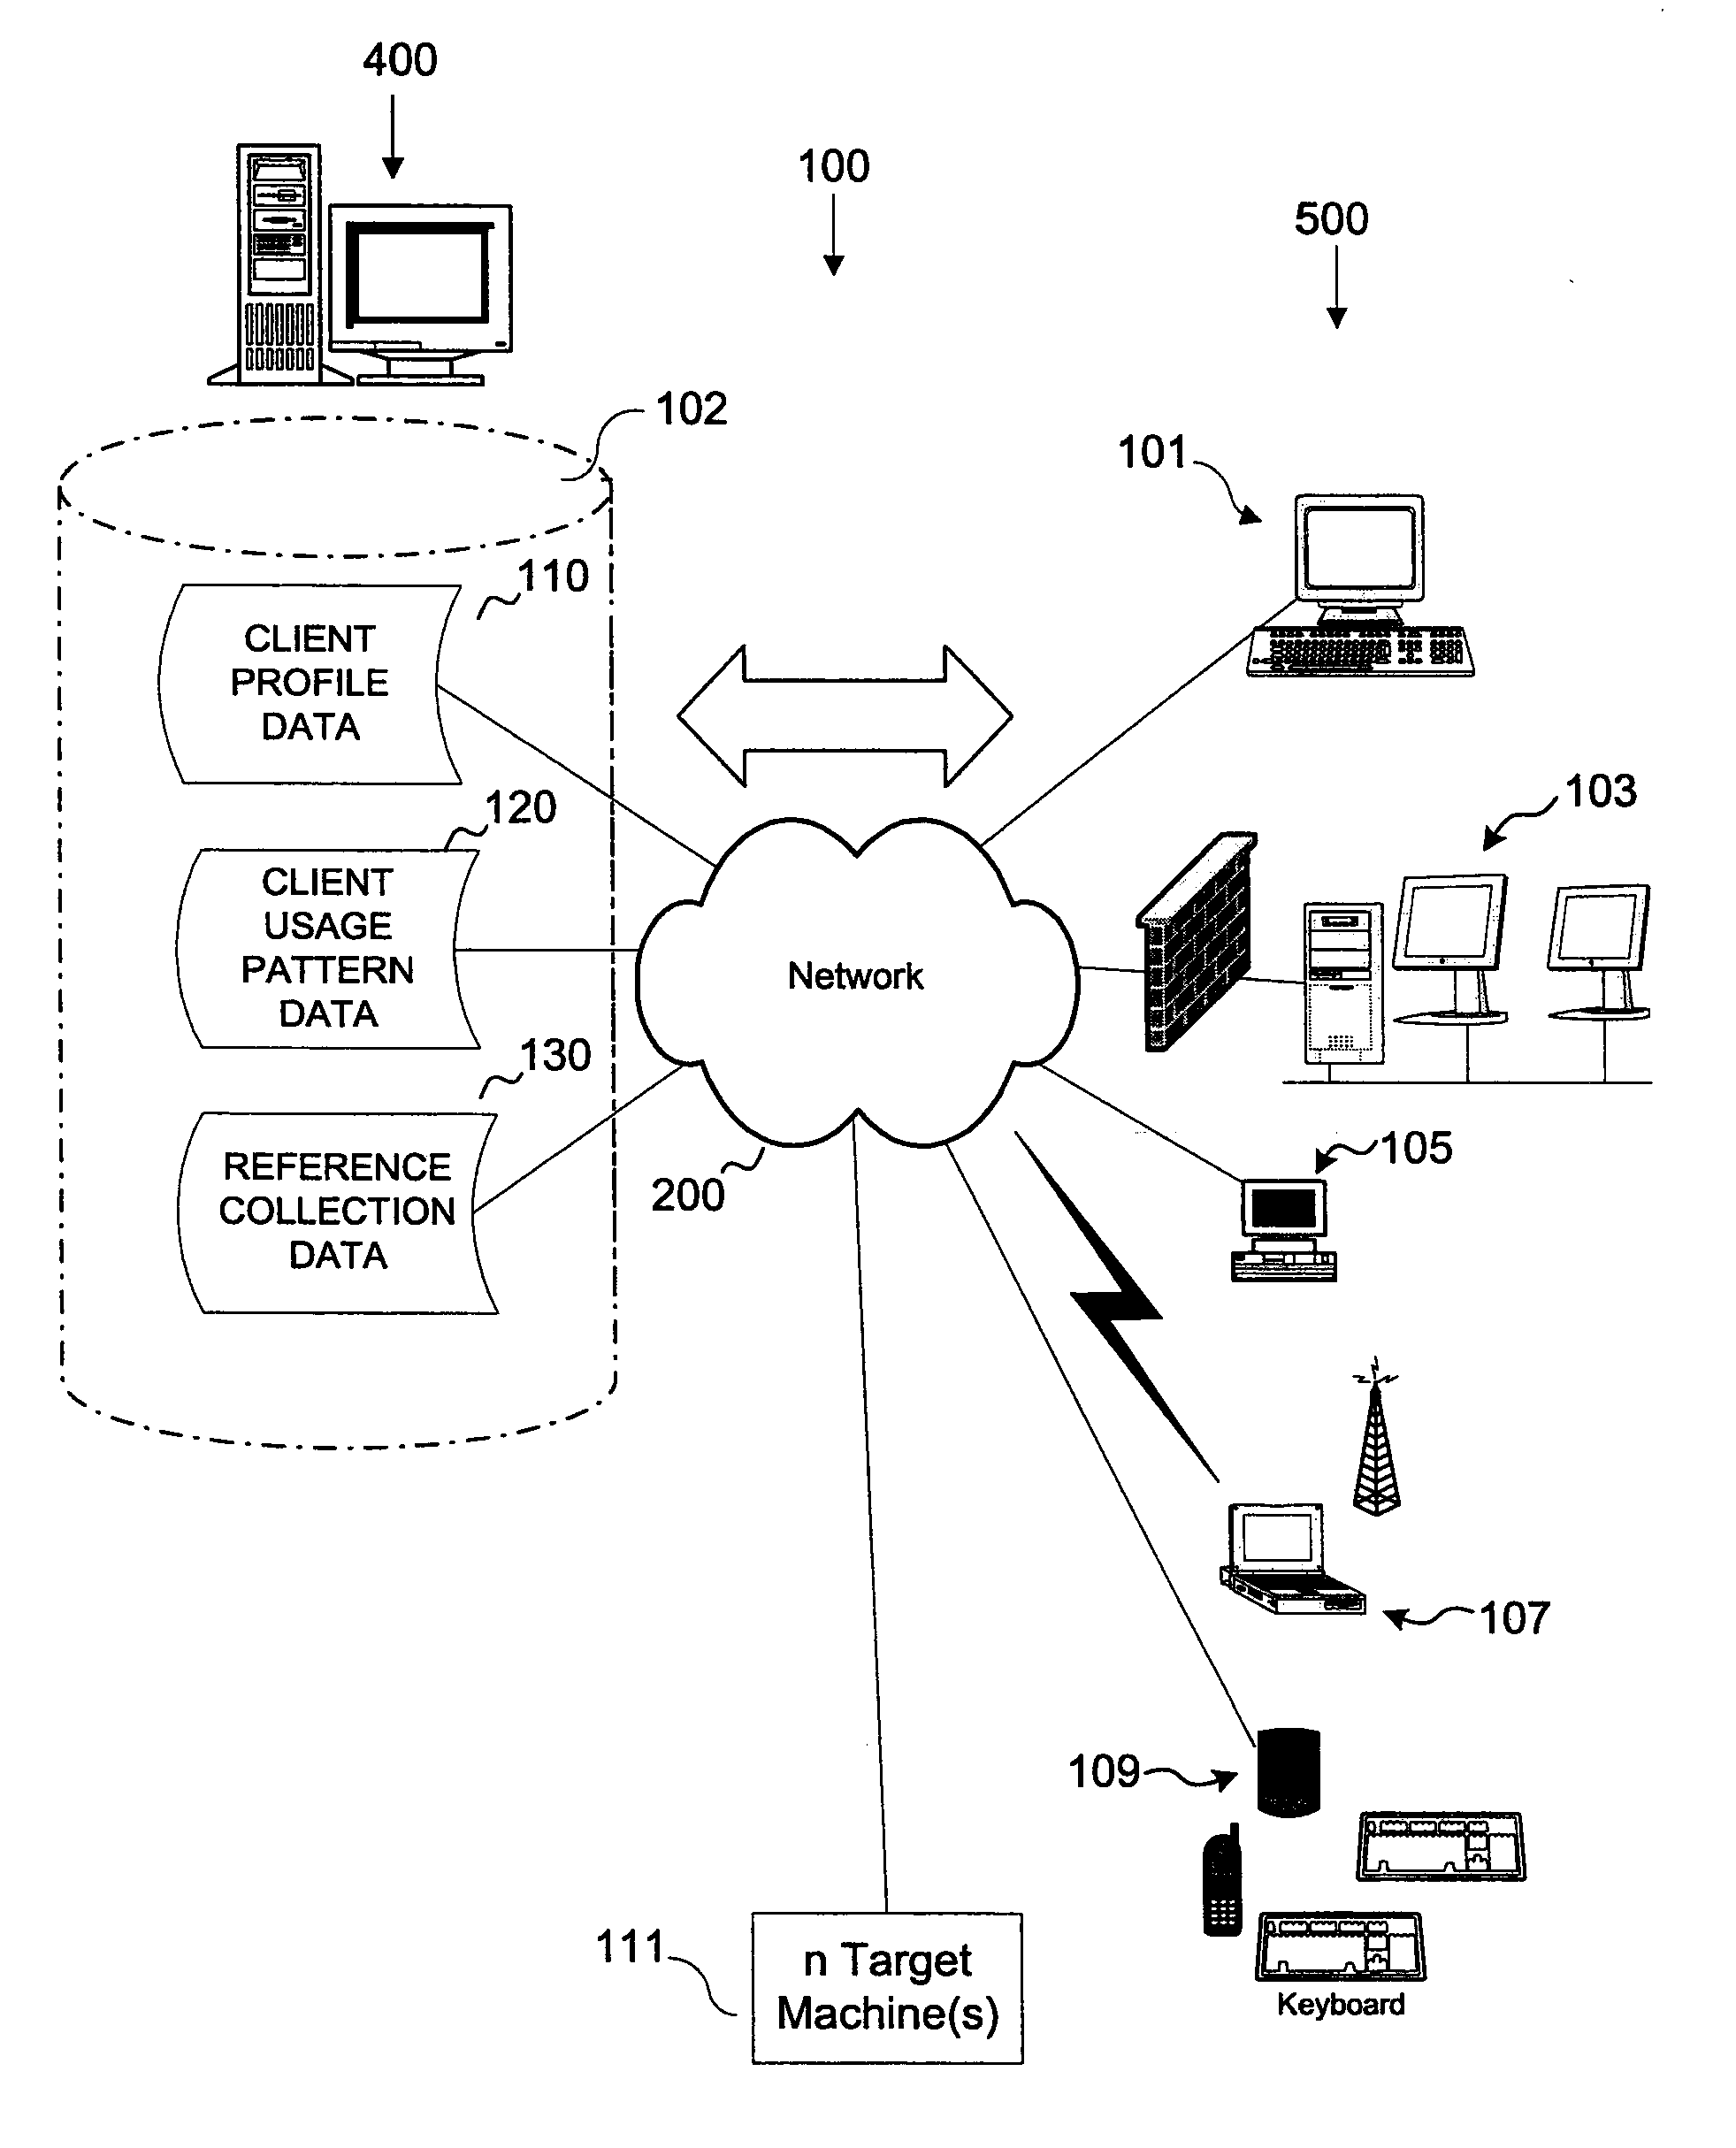 System and Method for Management of End User Computing Devices